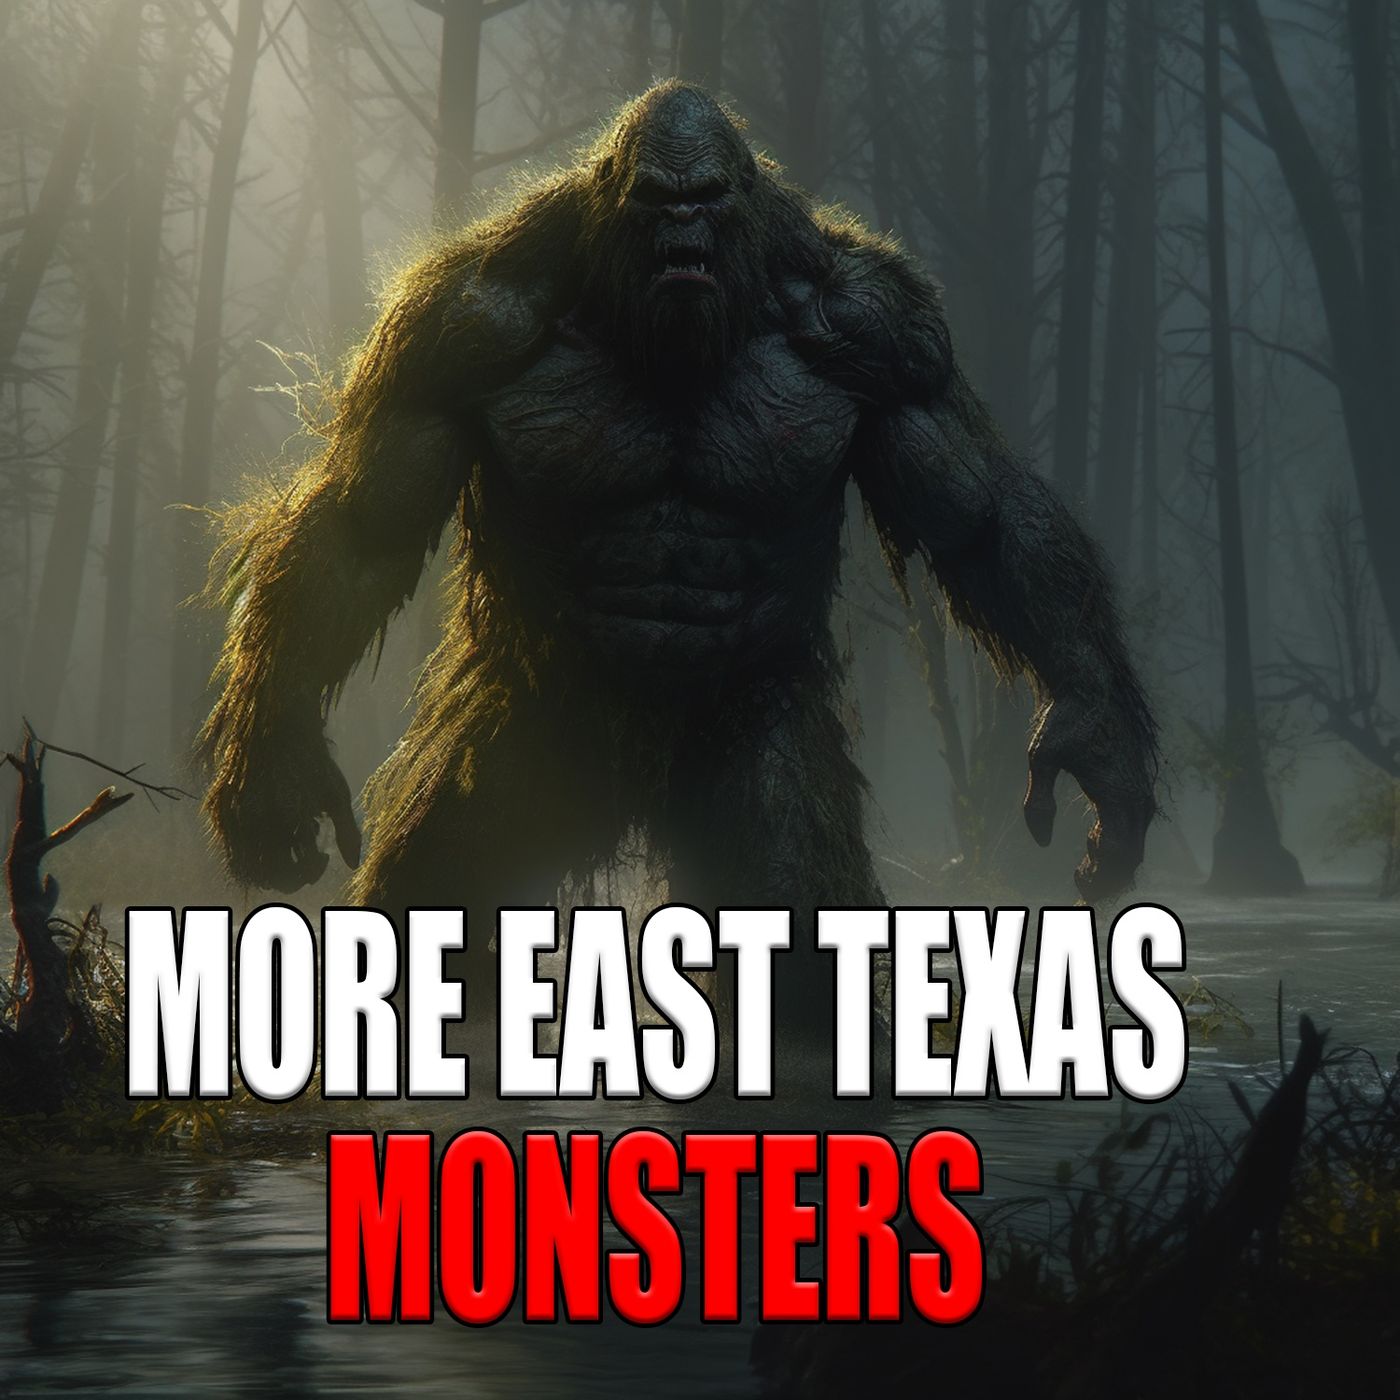 More East Texas Monsters